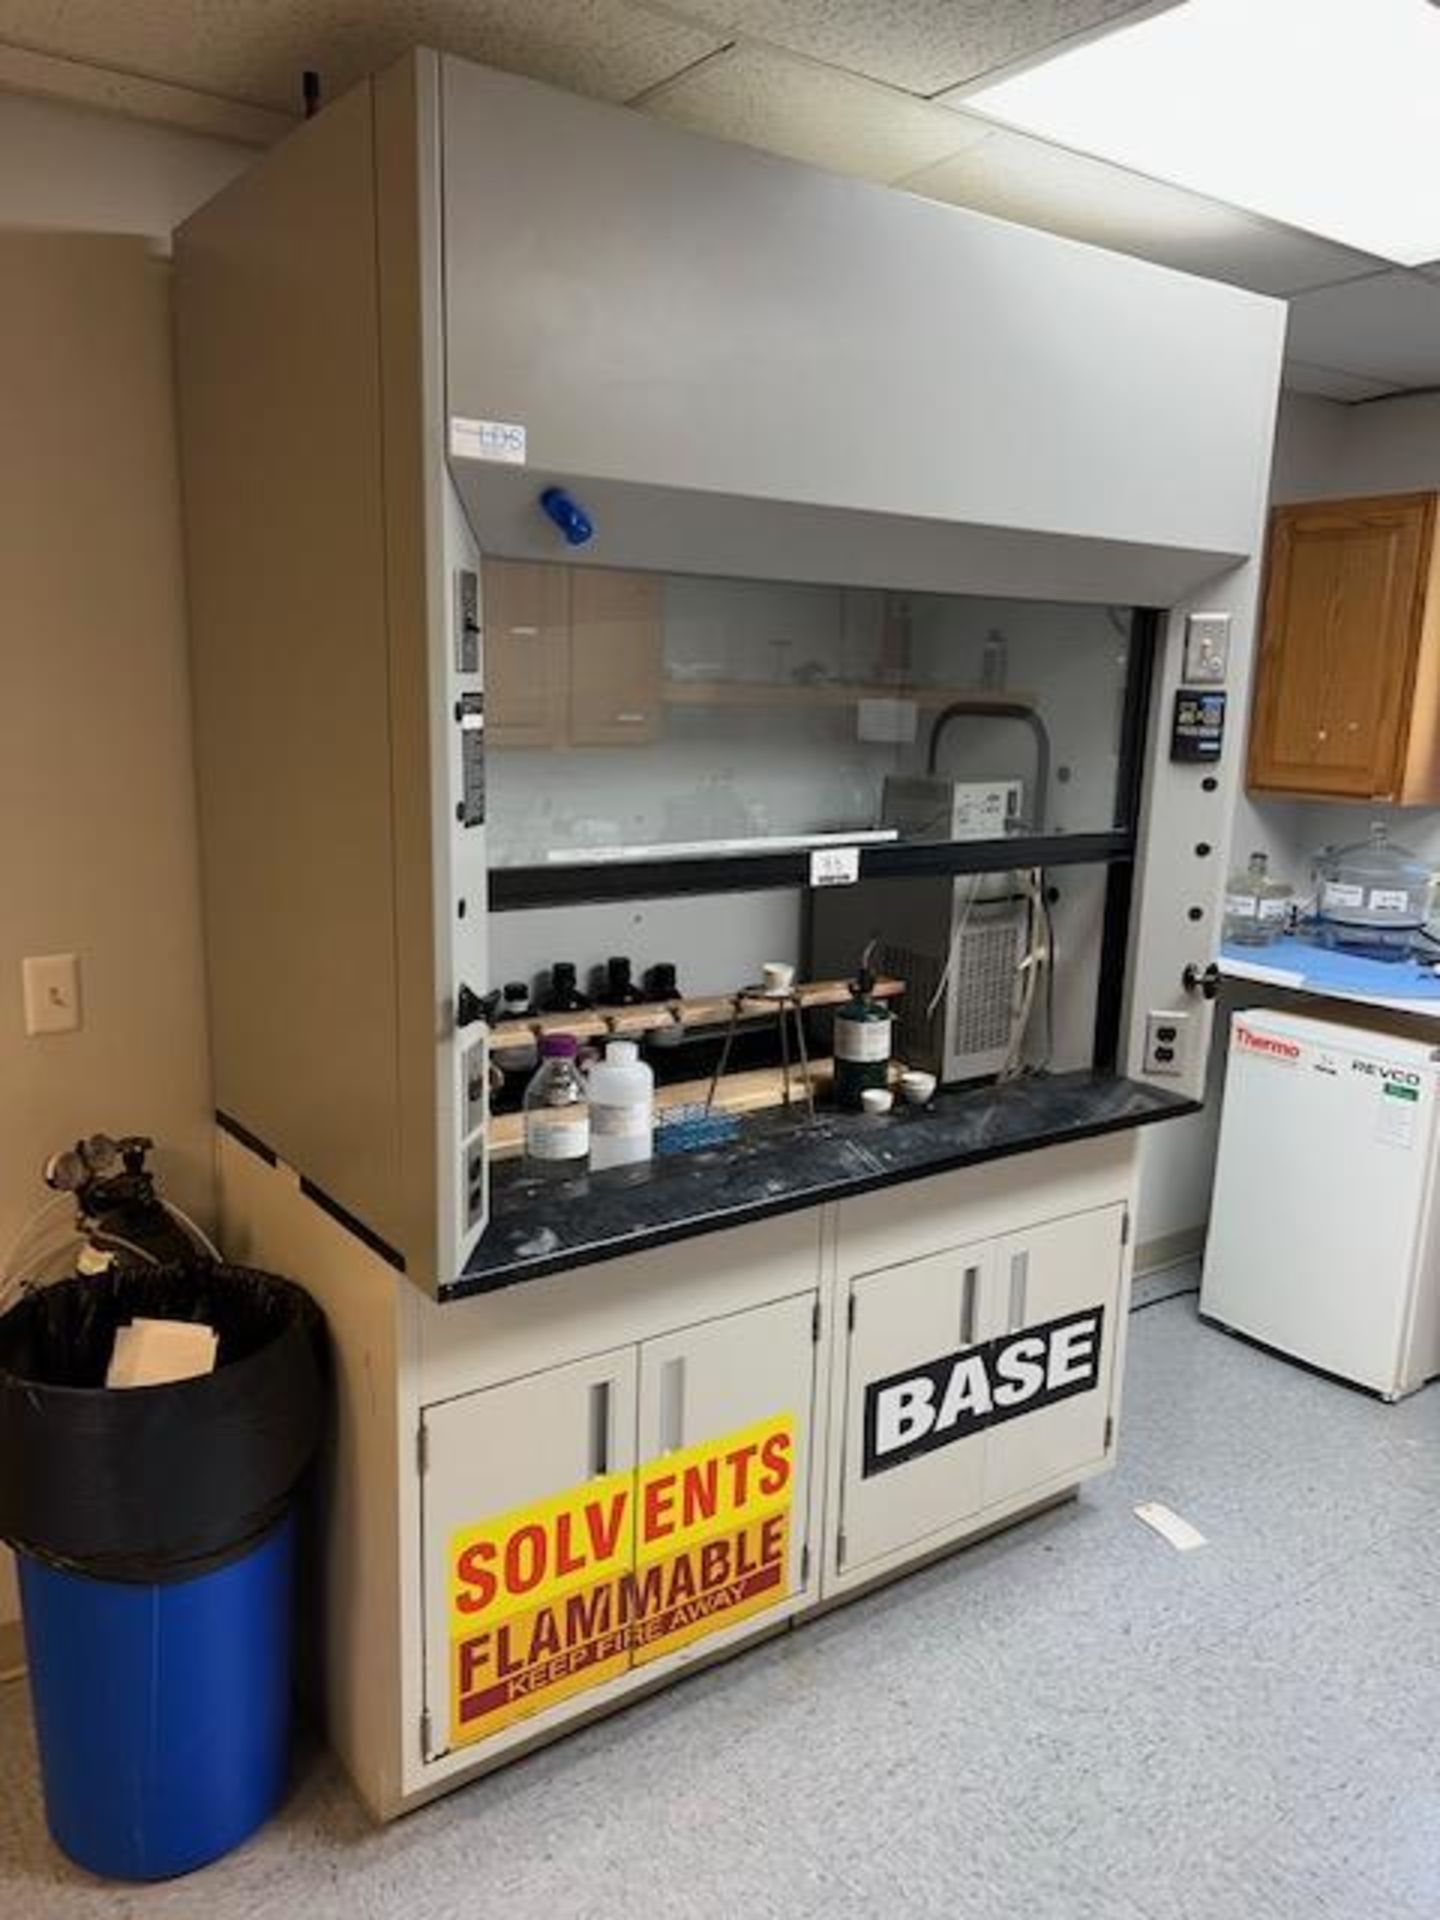 Asset 33 - Laboratory Design and Supply Fume Hood with AirGard 200 security system. External - Image 2 of 5